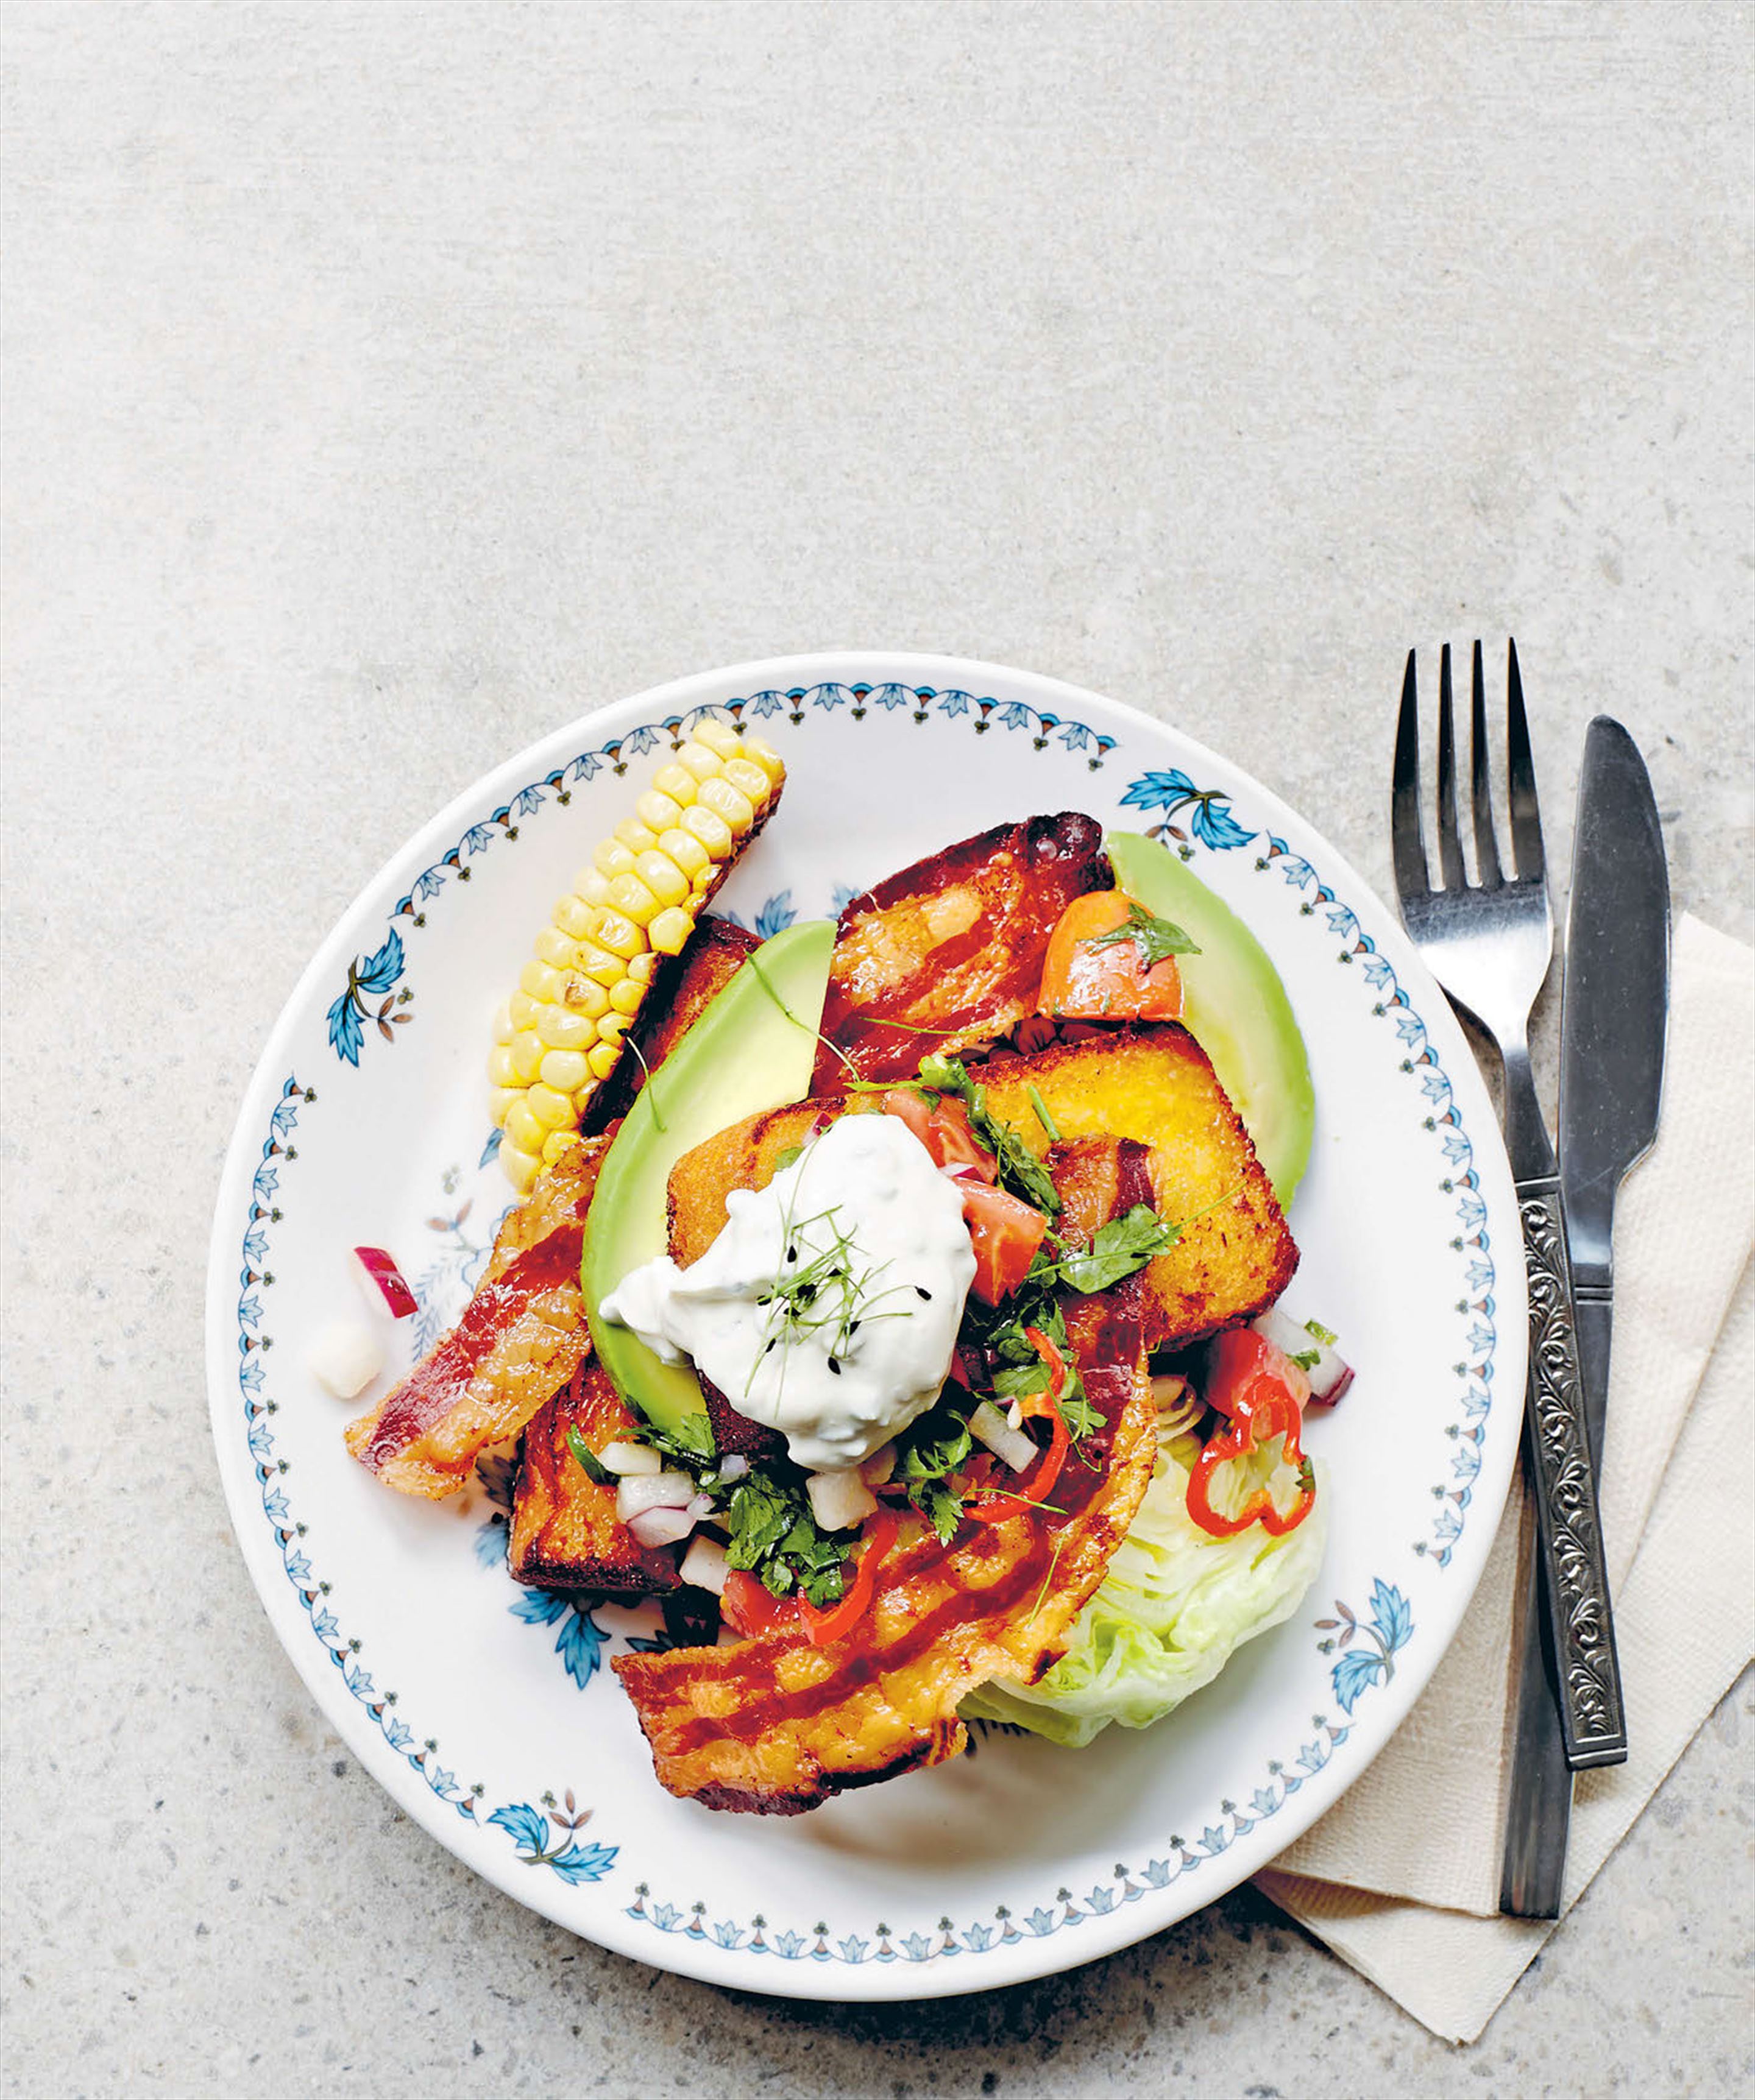 Sweetcorn French toast with pancetta & avocado